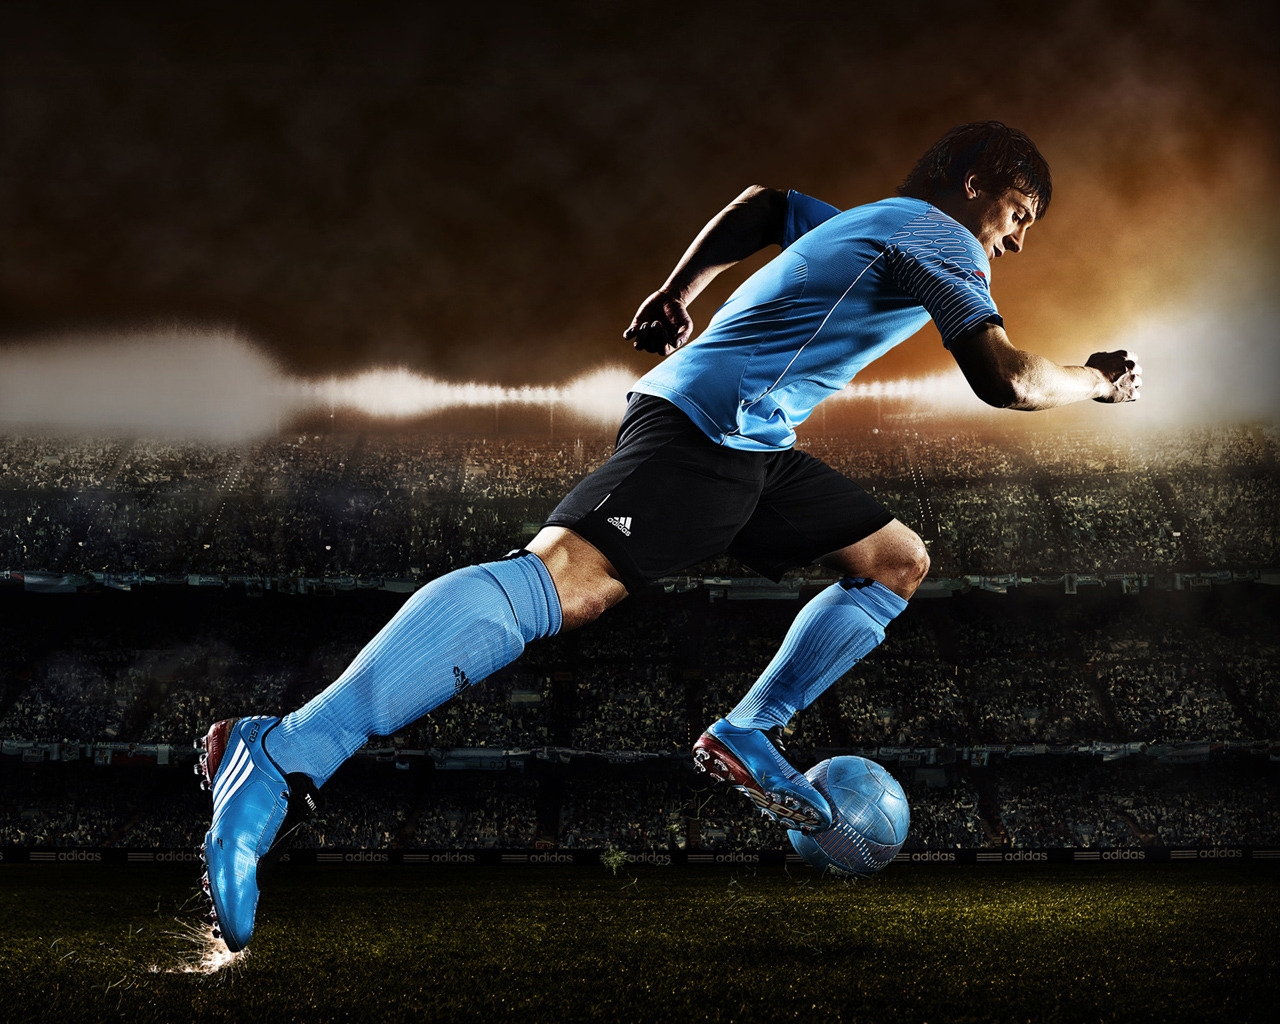 Lionel Messi Adidas for 1280 x 1024 resolution